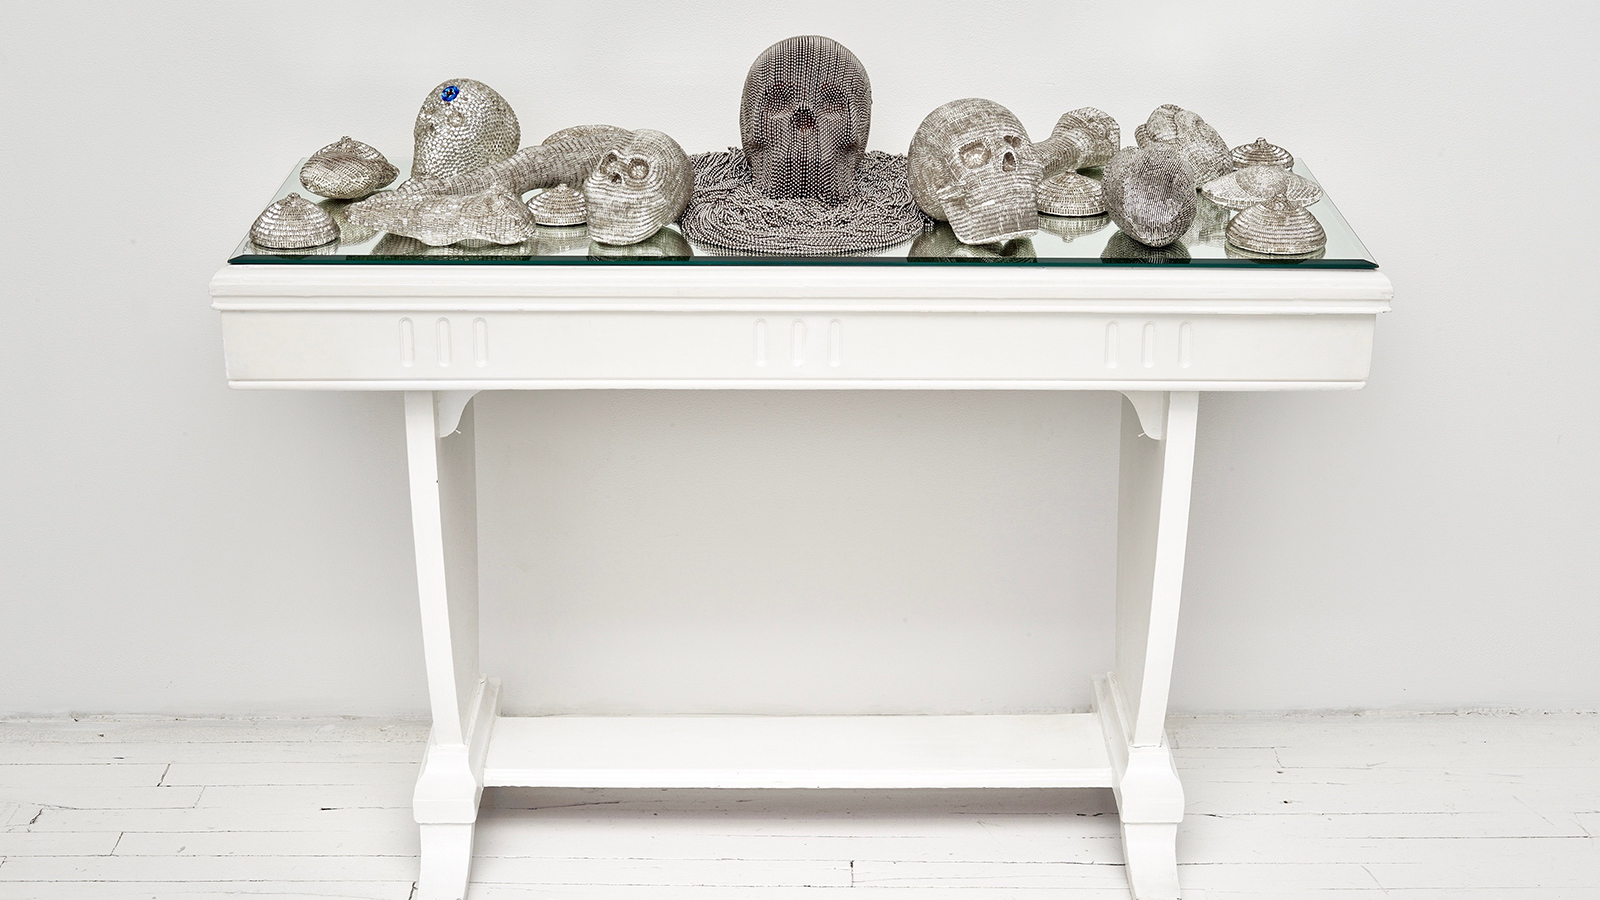 Esperanza Cortés; SECOND SIGHT; 2008 – 2018; 20 clay sculptures, glass beads, mirror, table. Second Sight honors the Curandera (healer) in Latinx culture as a whole, as well as the personal connection to my grandmothers who were both curanderas in Colombia. These individuals dedicated their lives to maintaining the physical and spiritual well being and equilibrium of their families and communities. Each individual piece represents the instruments and fruits of their Labors.